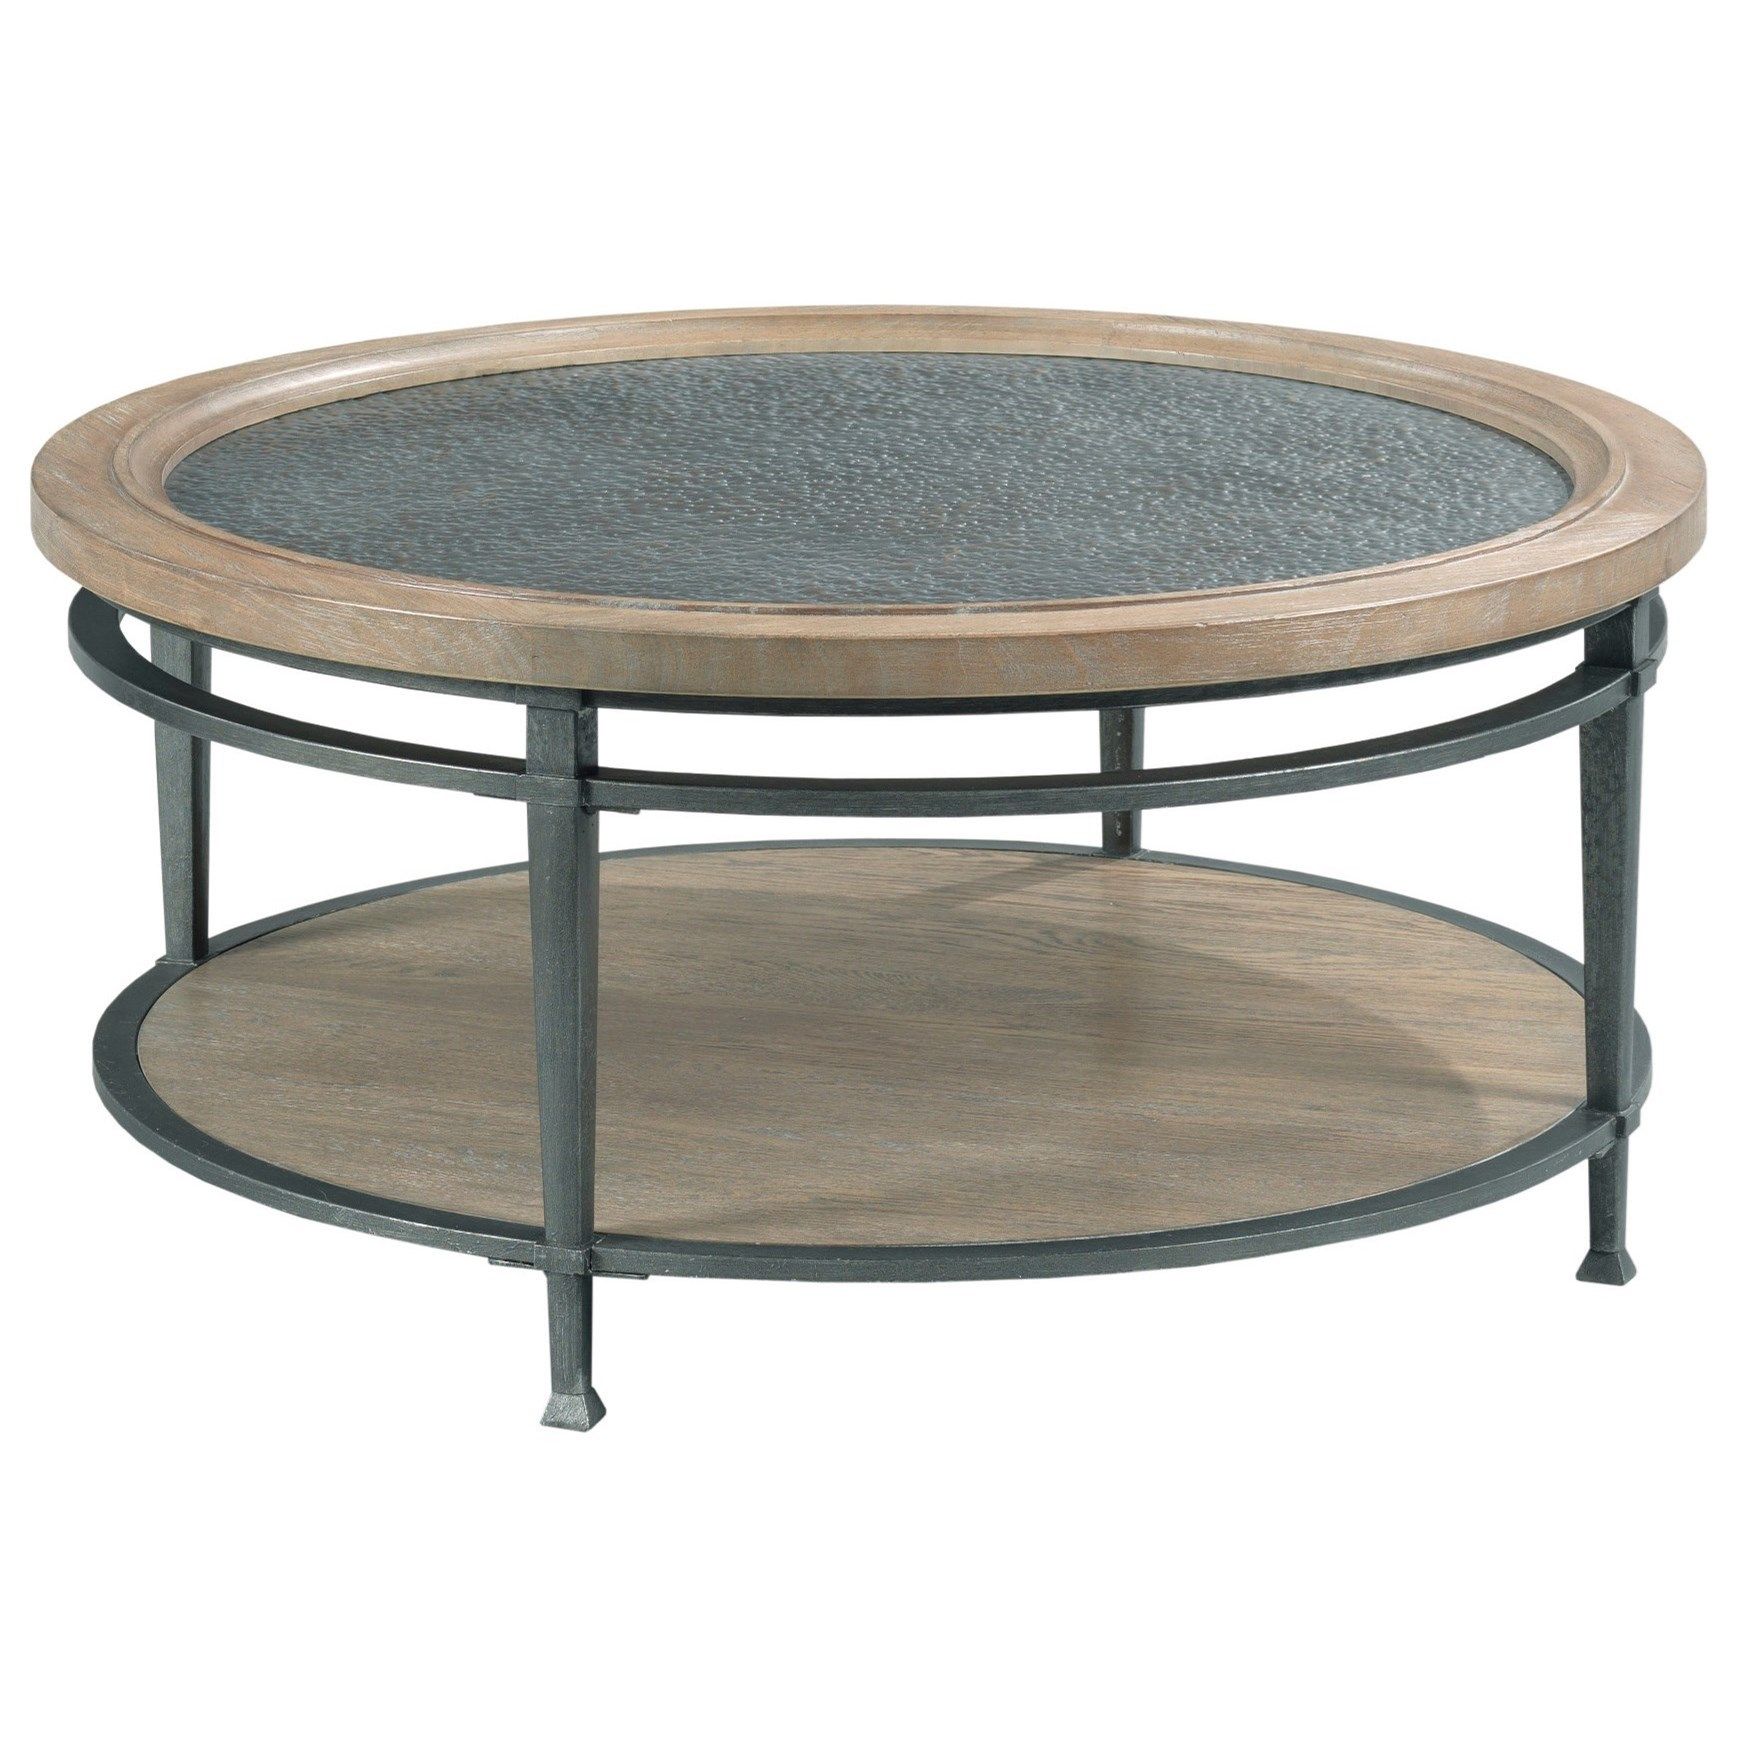 Hammary Austin Transitional Round Coffee Table | Wilson's Furniture Inside American Heritage Round Coffee Tables (Gallery 10 of 20)